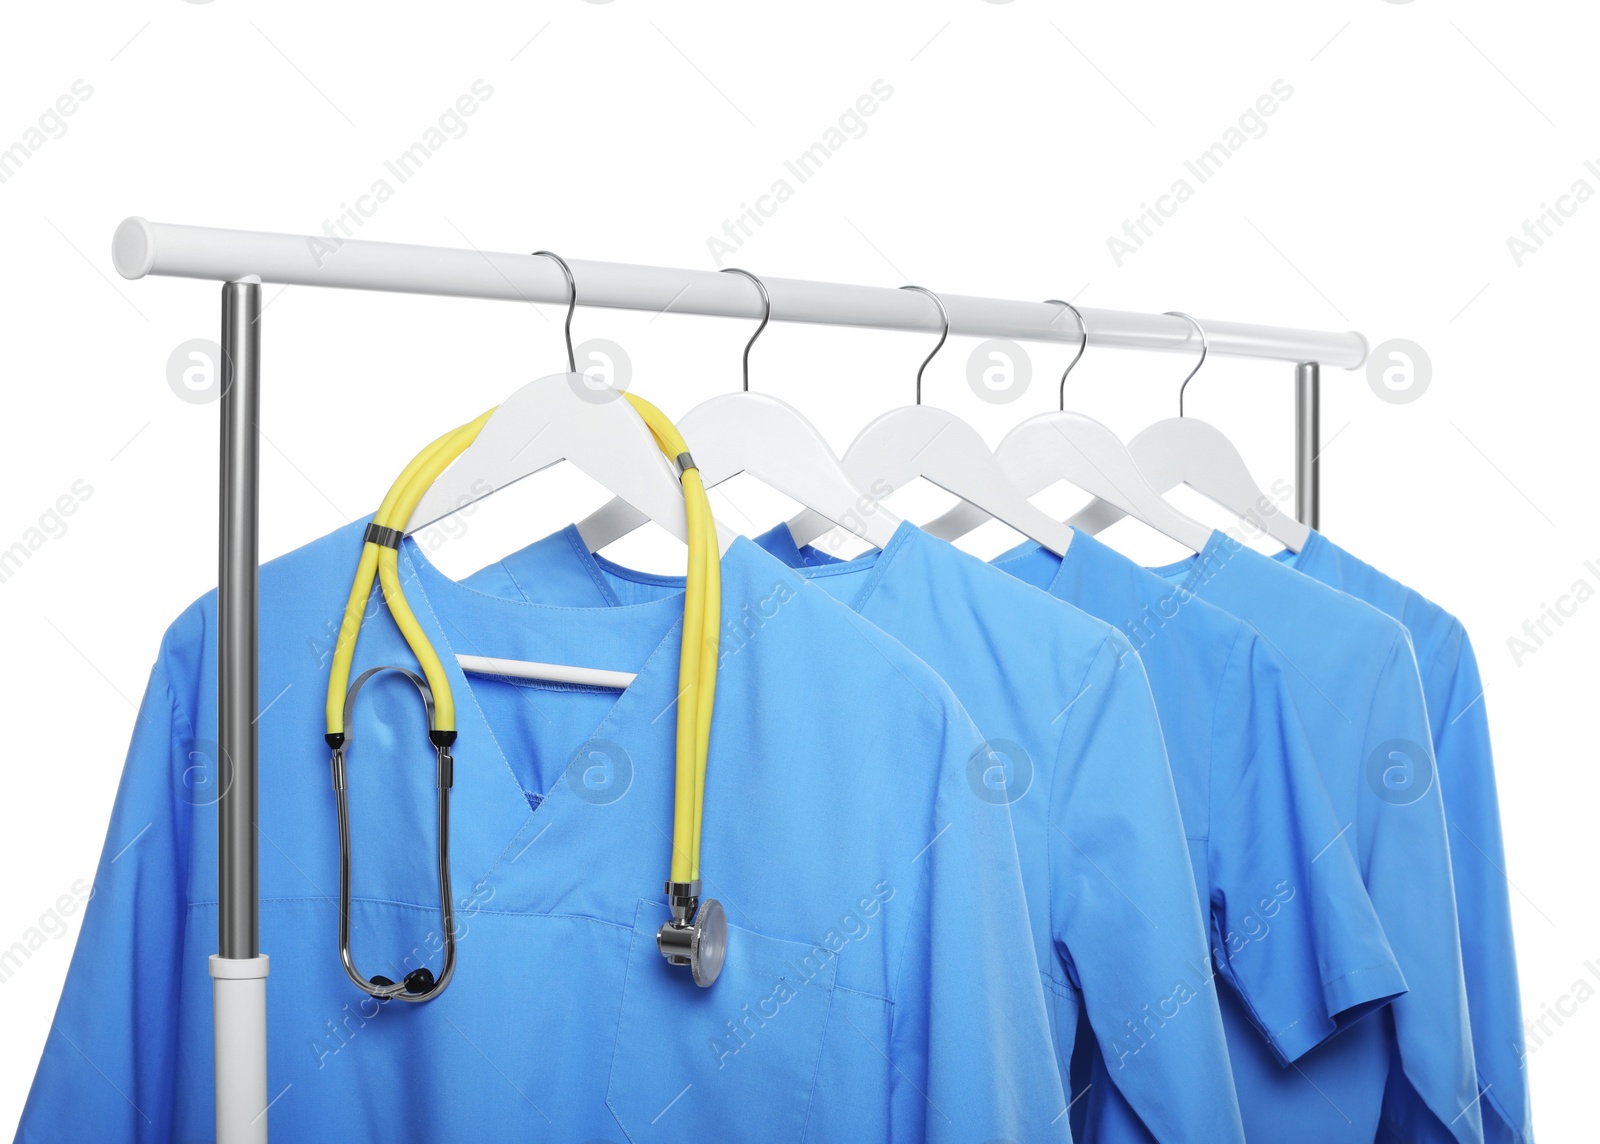 Photo of Light blue medical uniforms and stethoscope on rack against white background